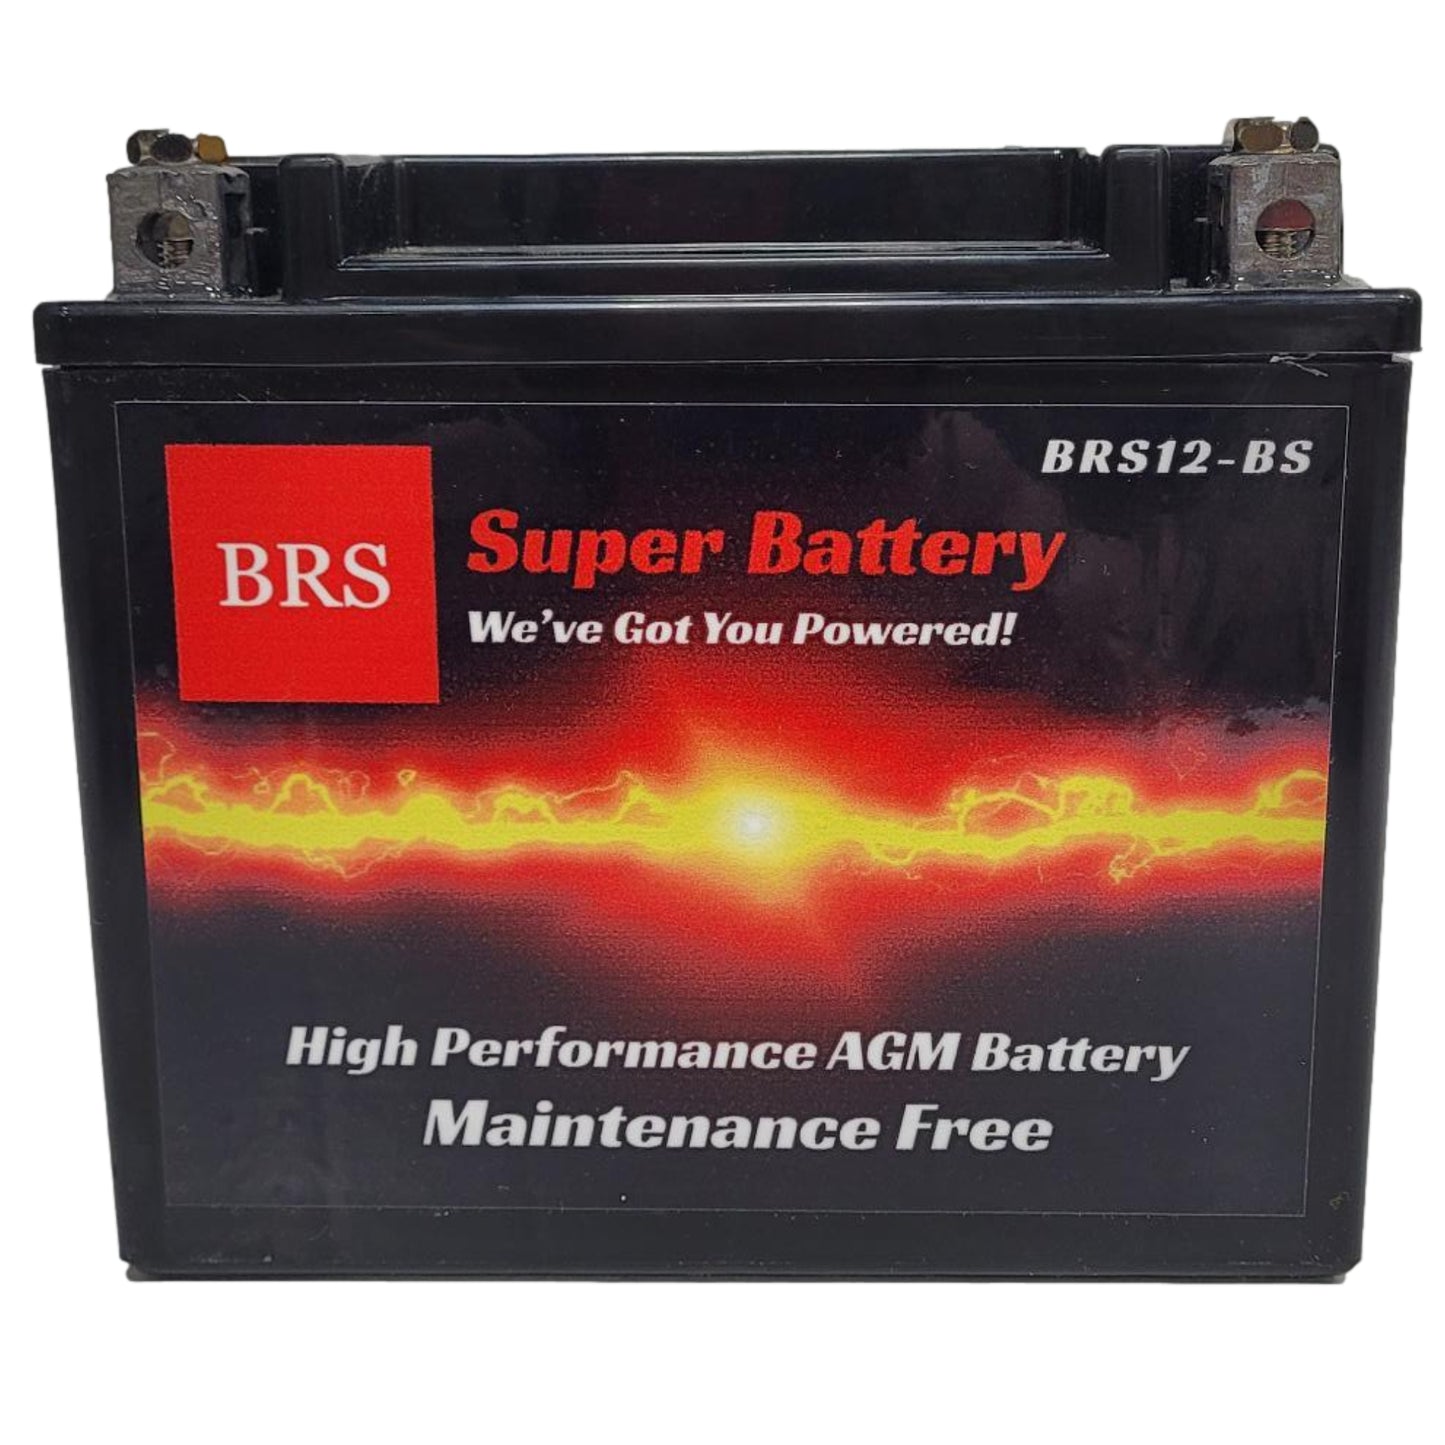 WPX12-BS 12v High Performance Sealed AGM PowerSport 10 Year Battery - BRS Super Battery